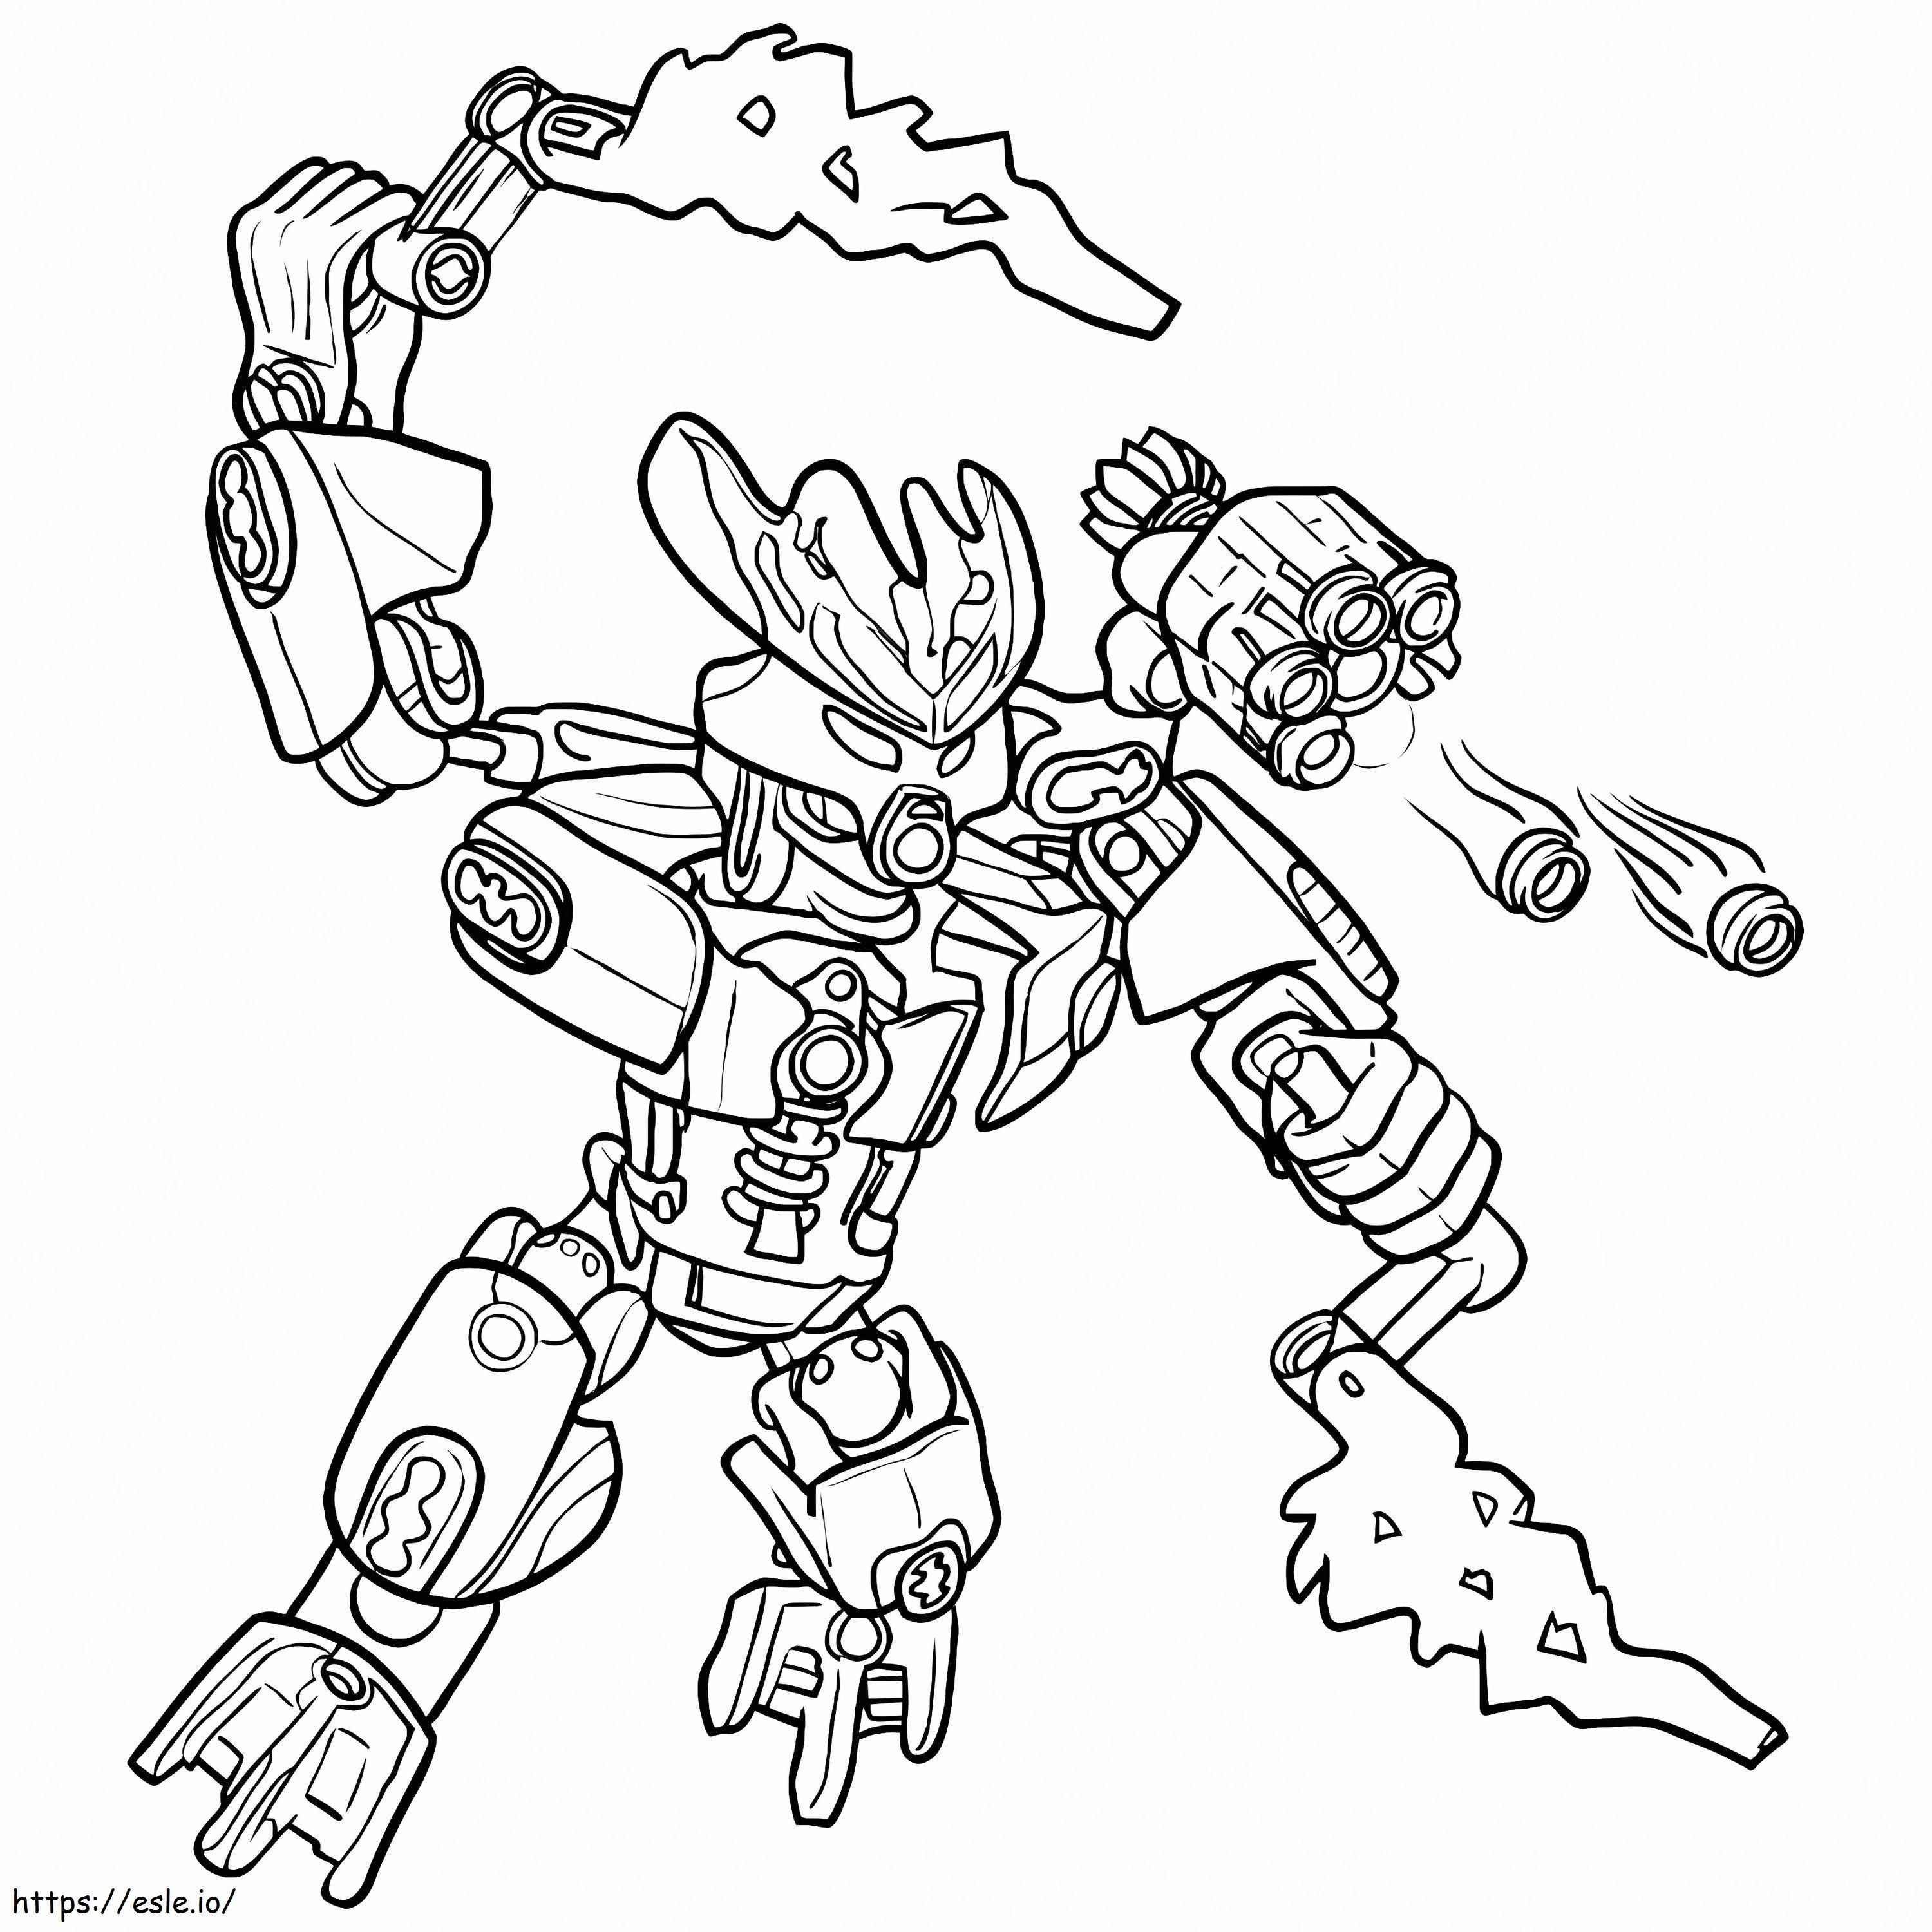 Protector Of Fire Bionicle coloring page